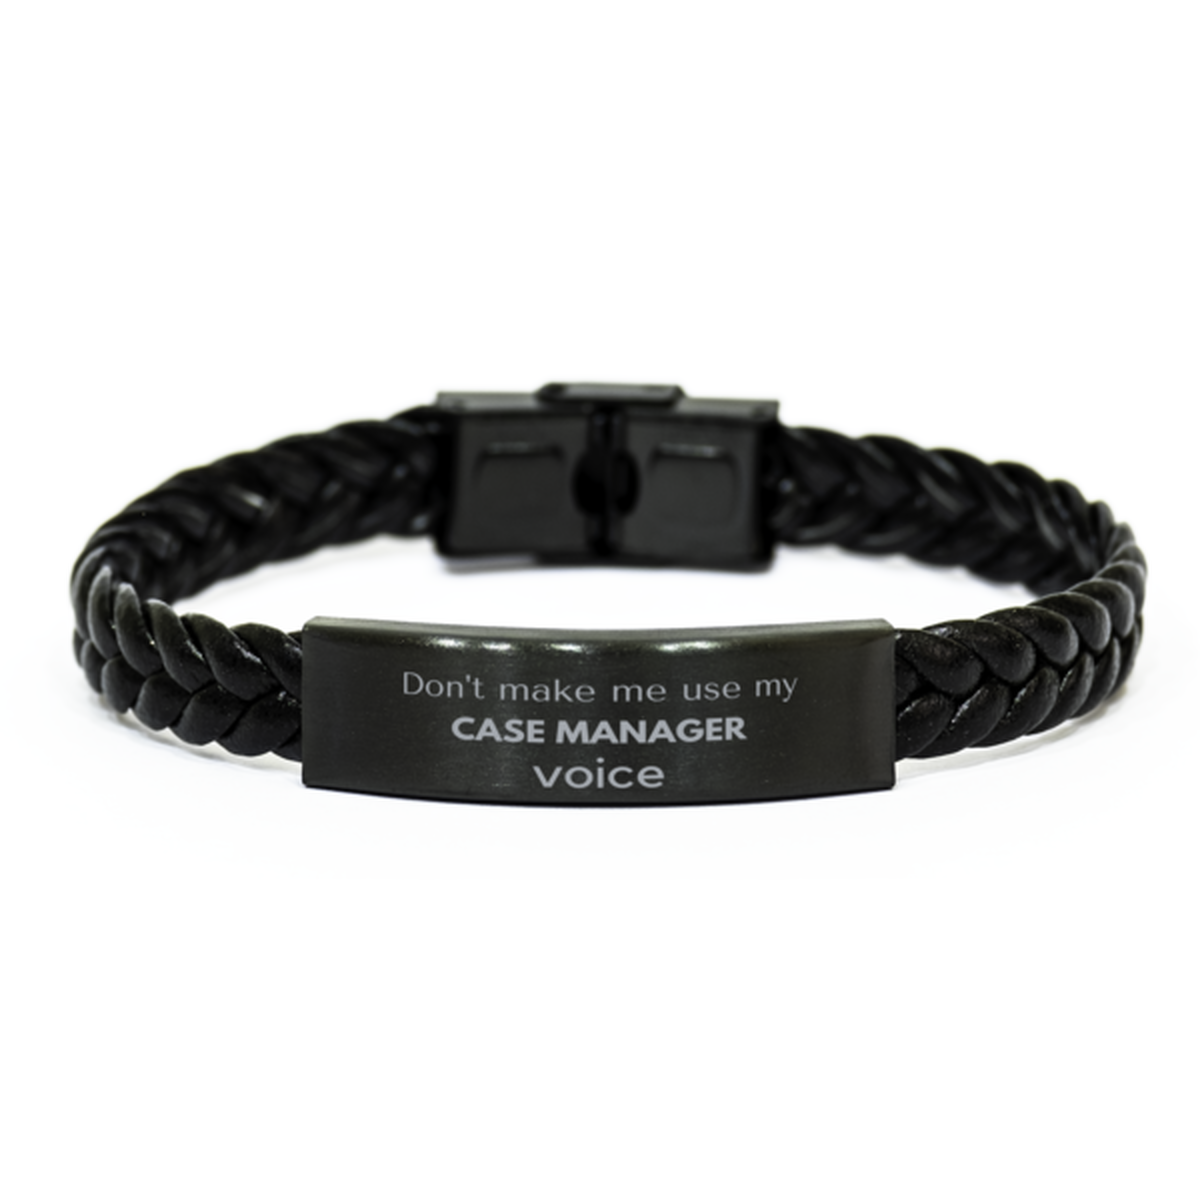 Don't make me use my Case Manager voice, Sarcasm Case Manager Gifts, Christmas Case Manager Braided Leather Bracelet Birthday Unique Gifts For Case Manager Coworkers, Men, Women, Colleague, Friends